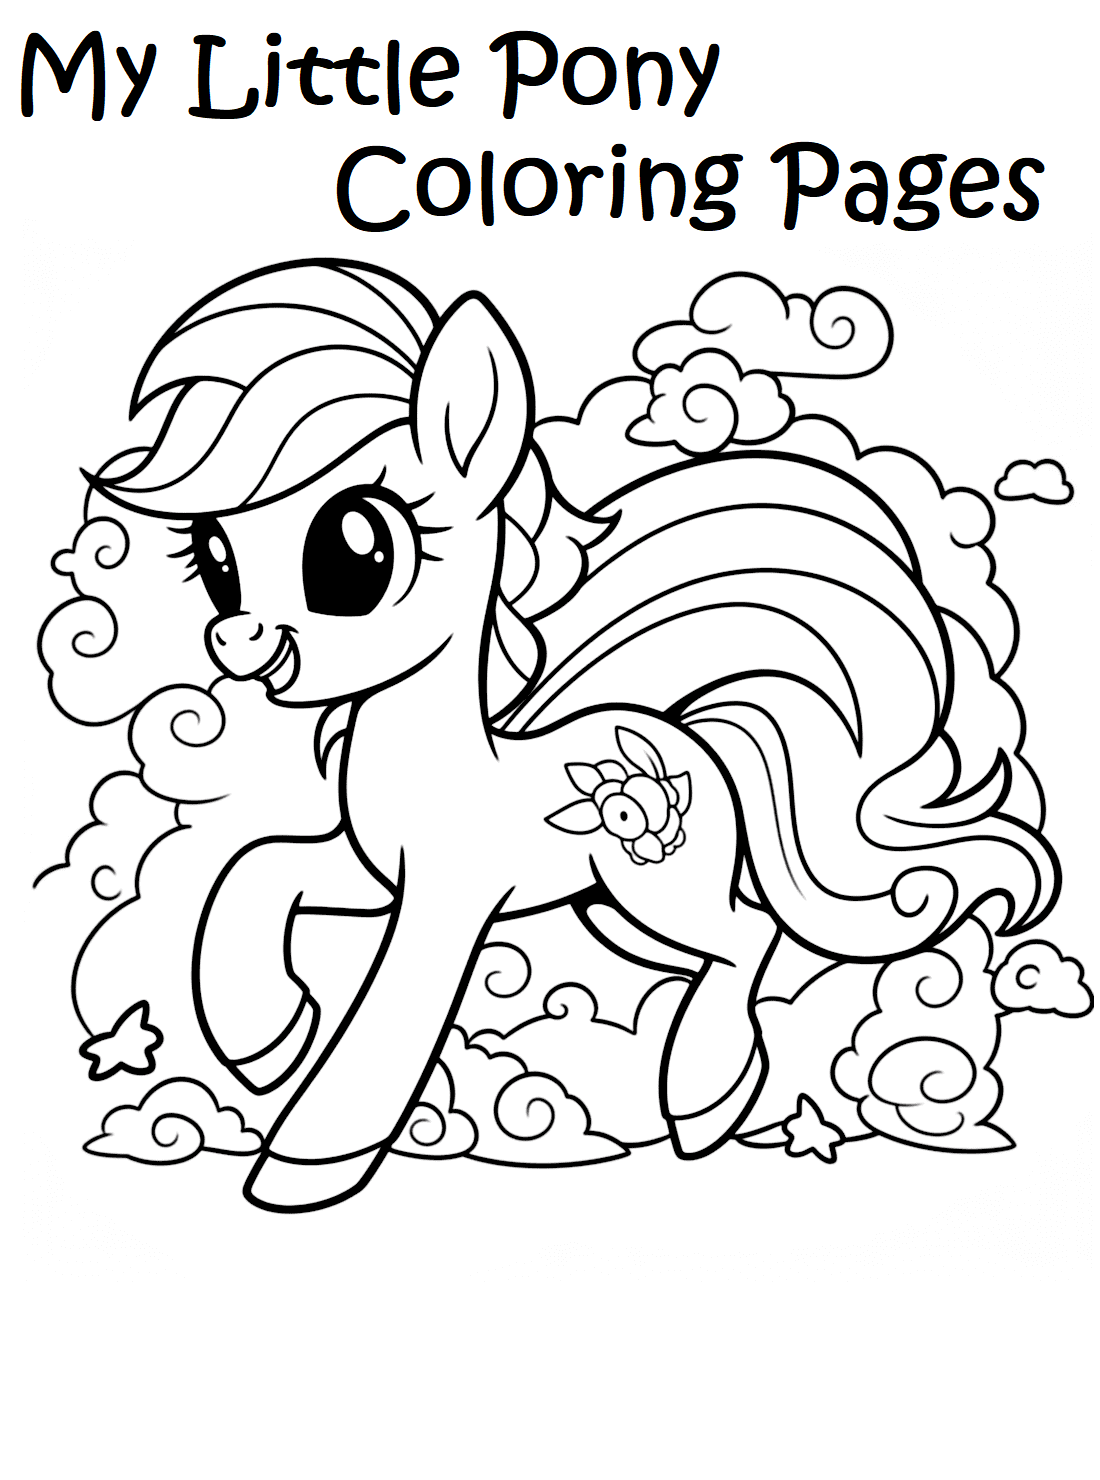 My Little Pony coloring pages Free Online For Kids